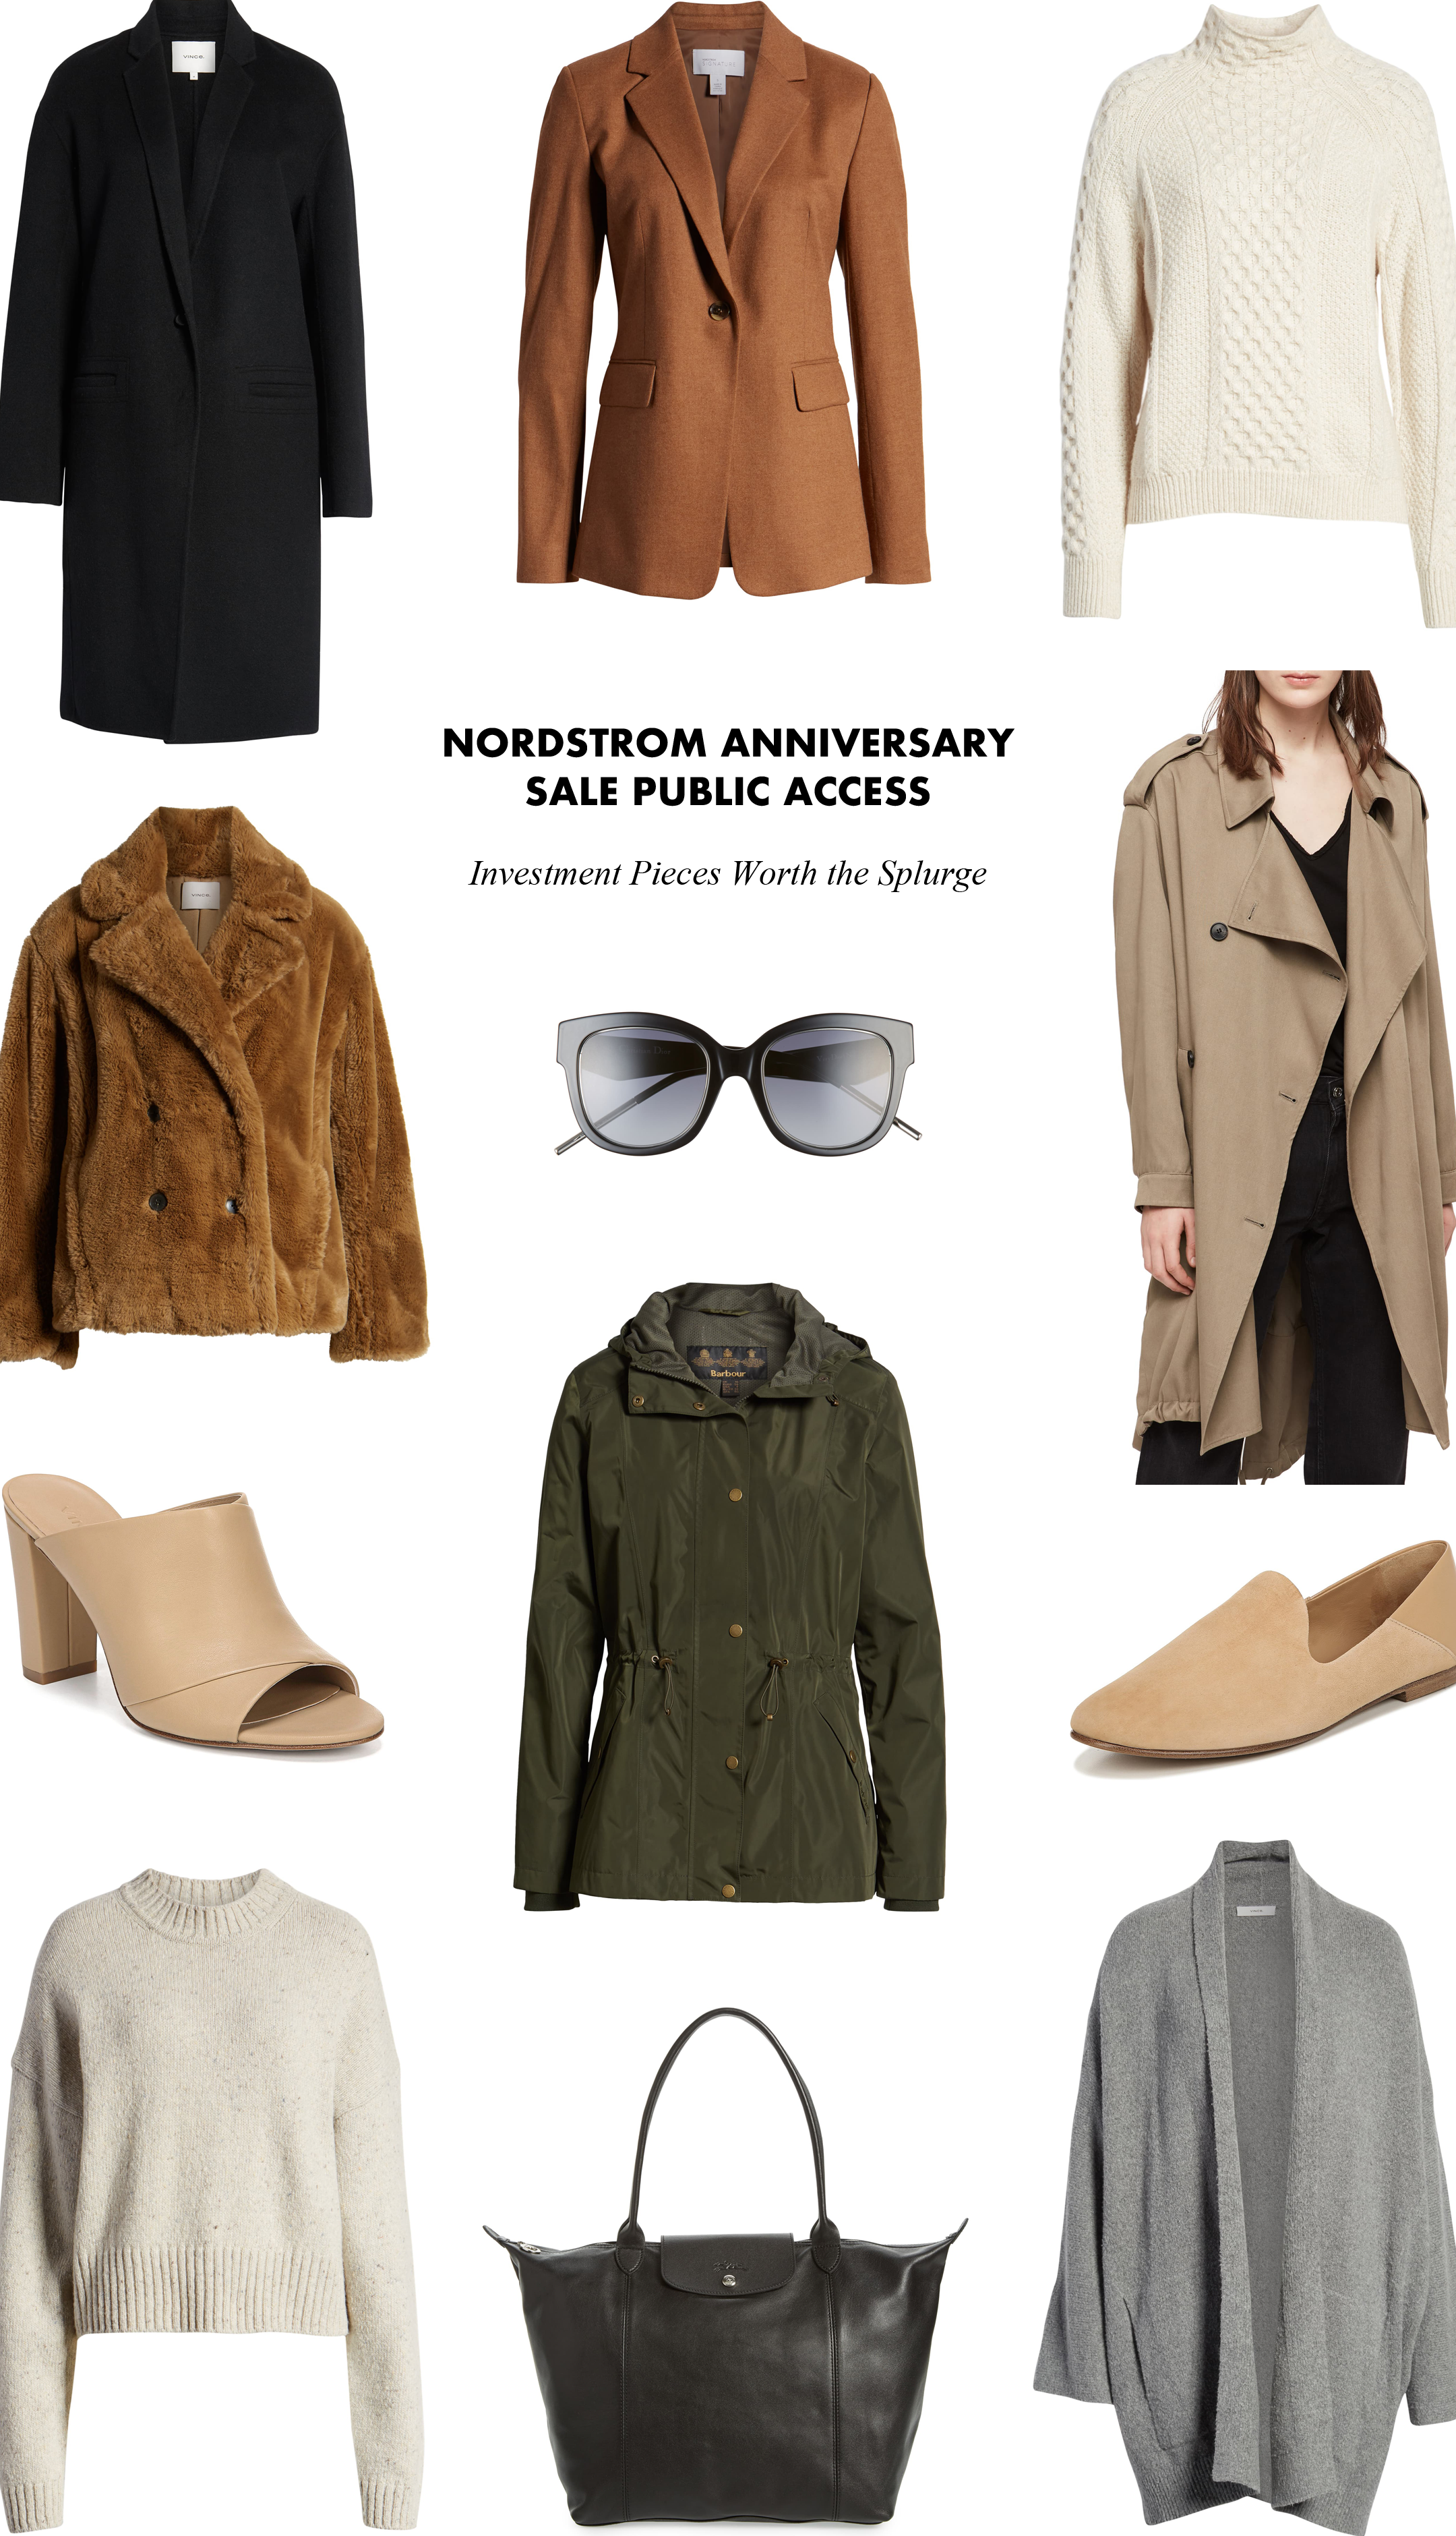 Nordstrom Anniversary sale investment pieces